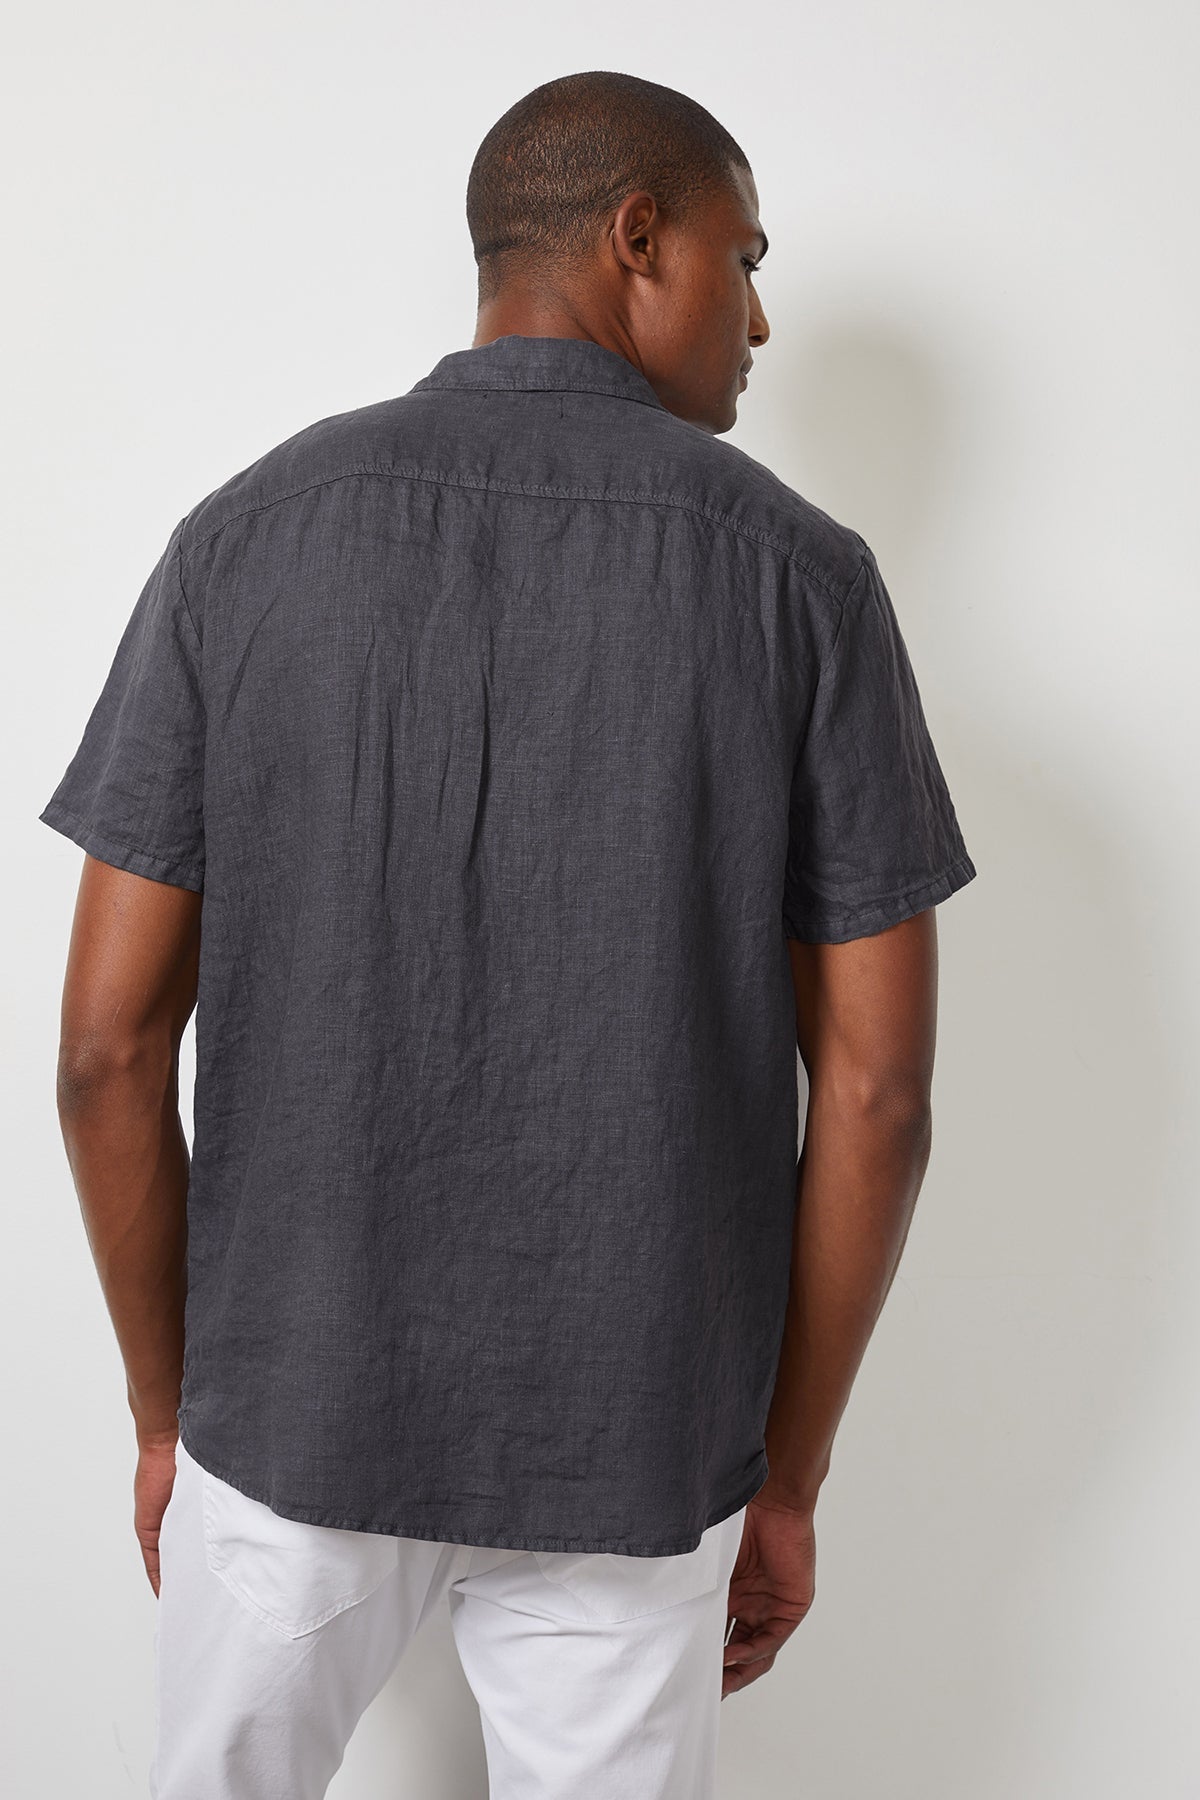 Mackie linen button up shirt in carbon-25578273702081